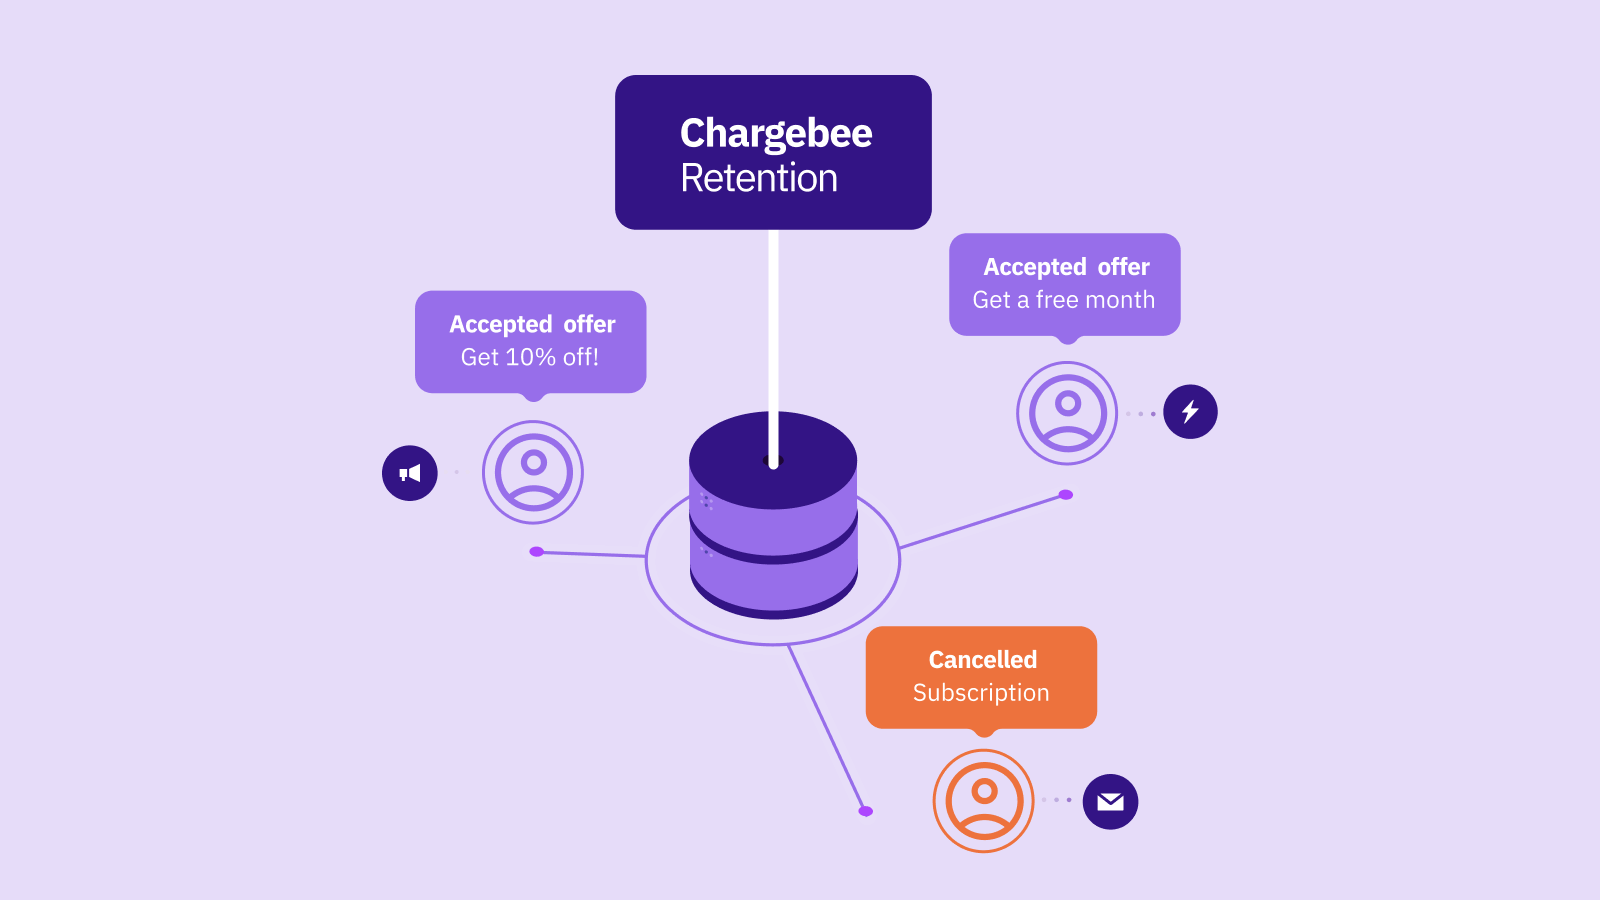 Chargebee retention strategies and outcomes